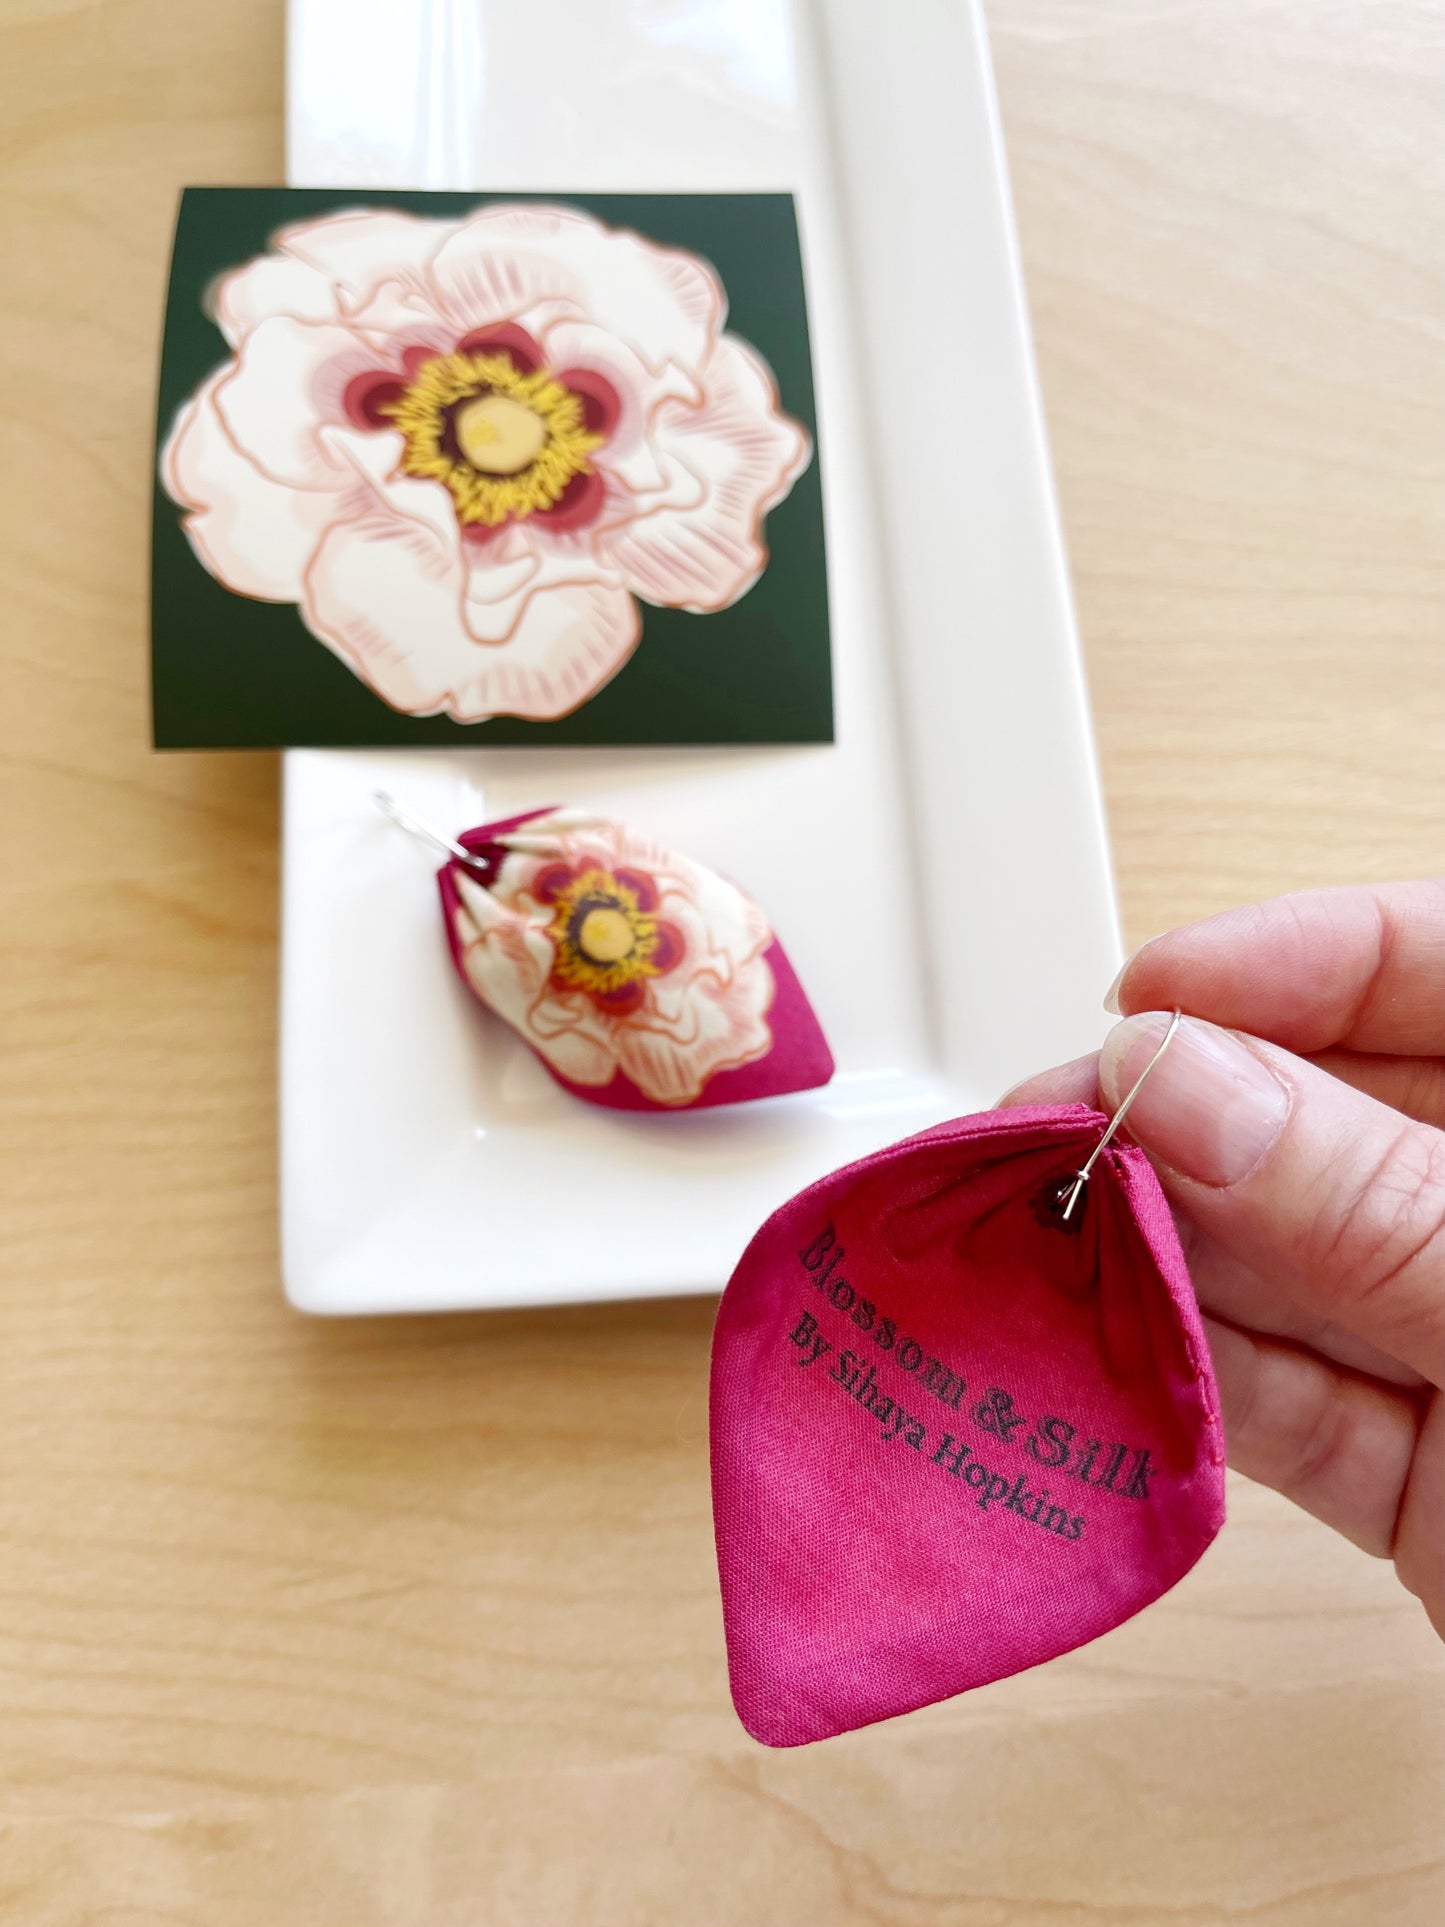 AE. Parchment Peonies on a magenta background large petal cotton statement earrings